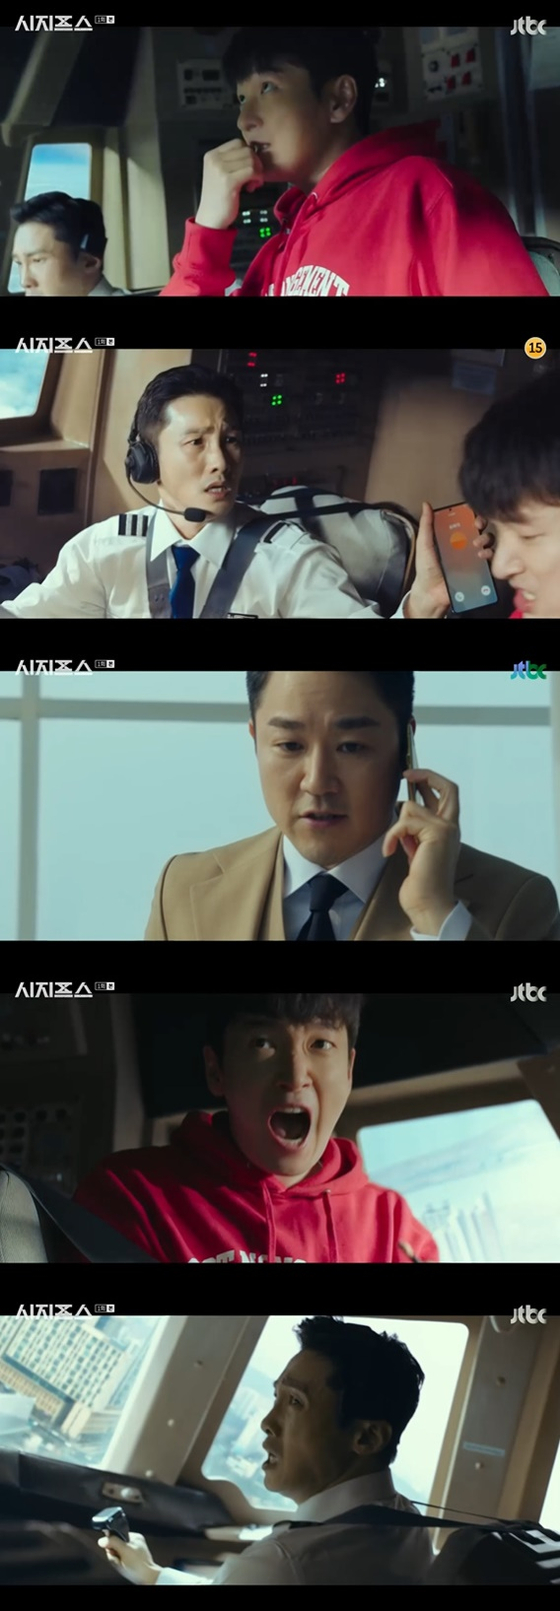 ‘Cyprus’ Jo Seung-woo became a national hero after saving an airplane in crisis